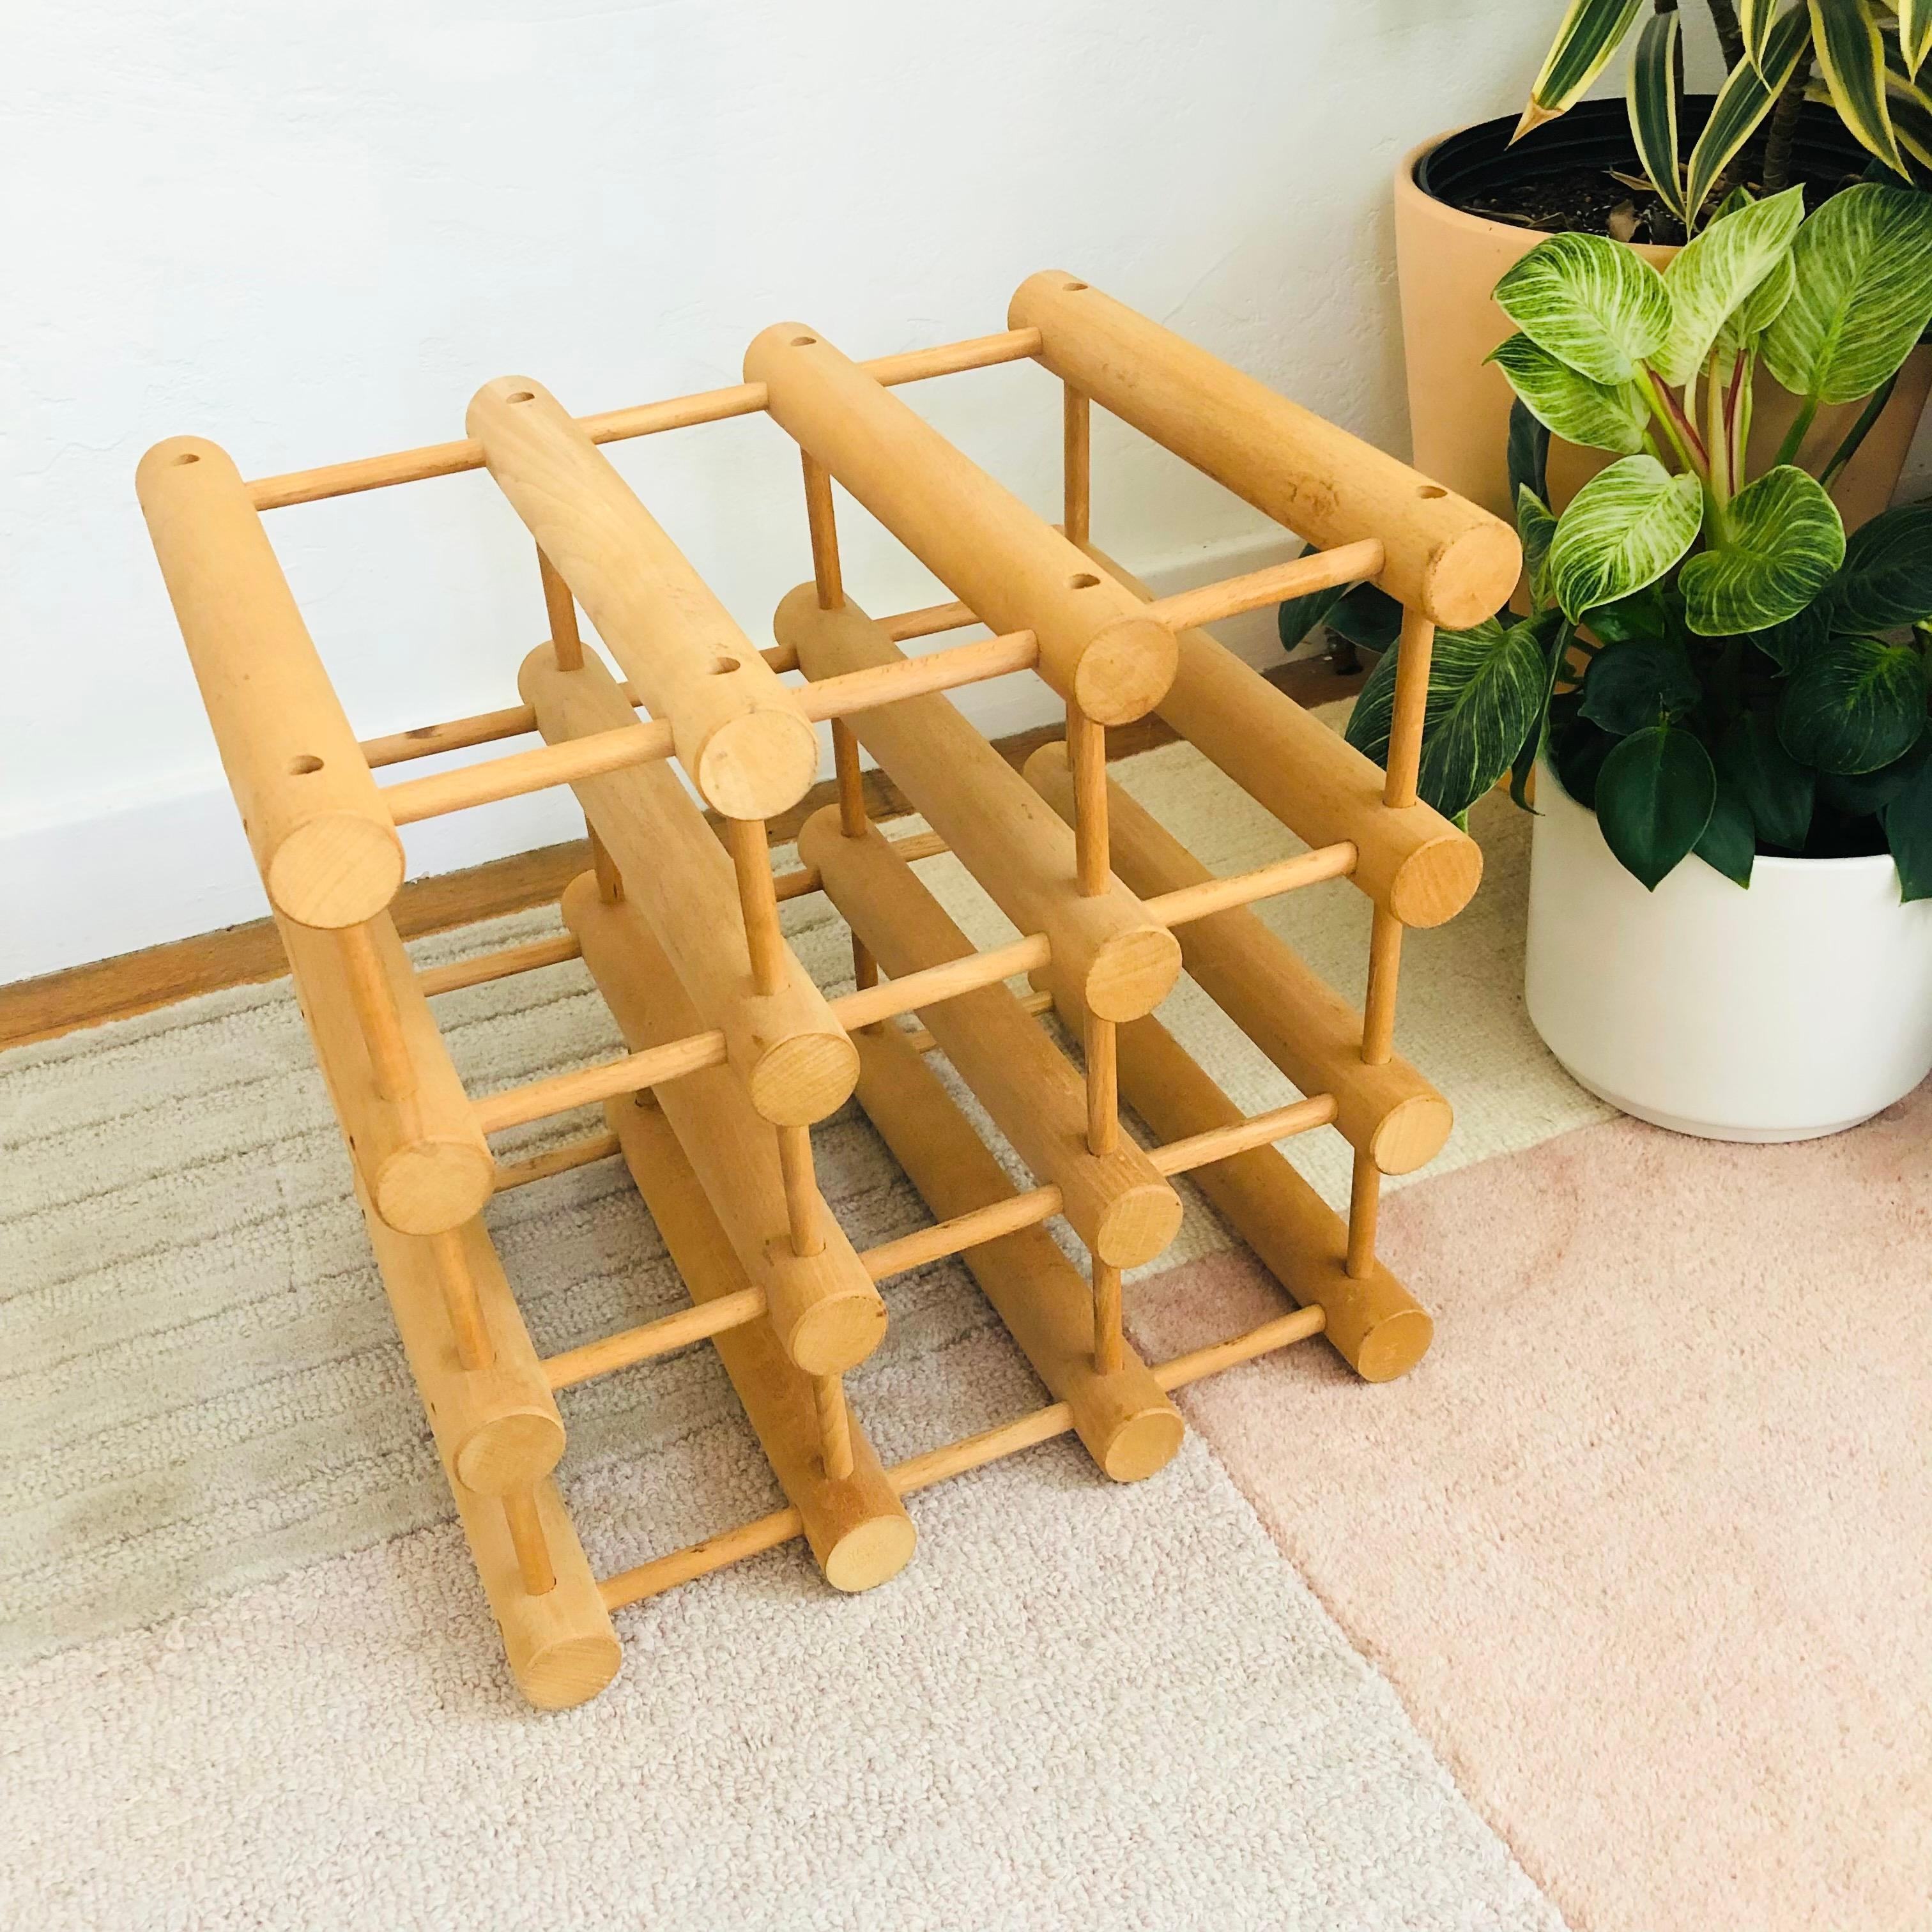 An original vintage wine rack designed by Richard Nissen from Langaa, Denmark. Beautiful minimalist wood peg design made of unfinished beechwood. Can hold 12 bottles. Stamped at the end of one peg 